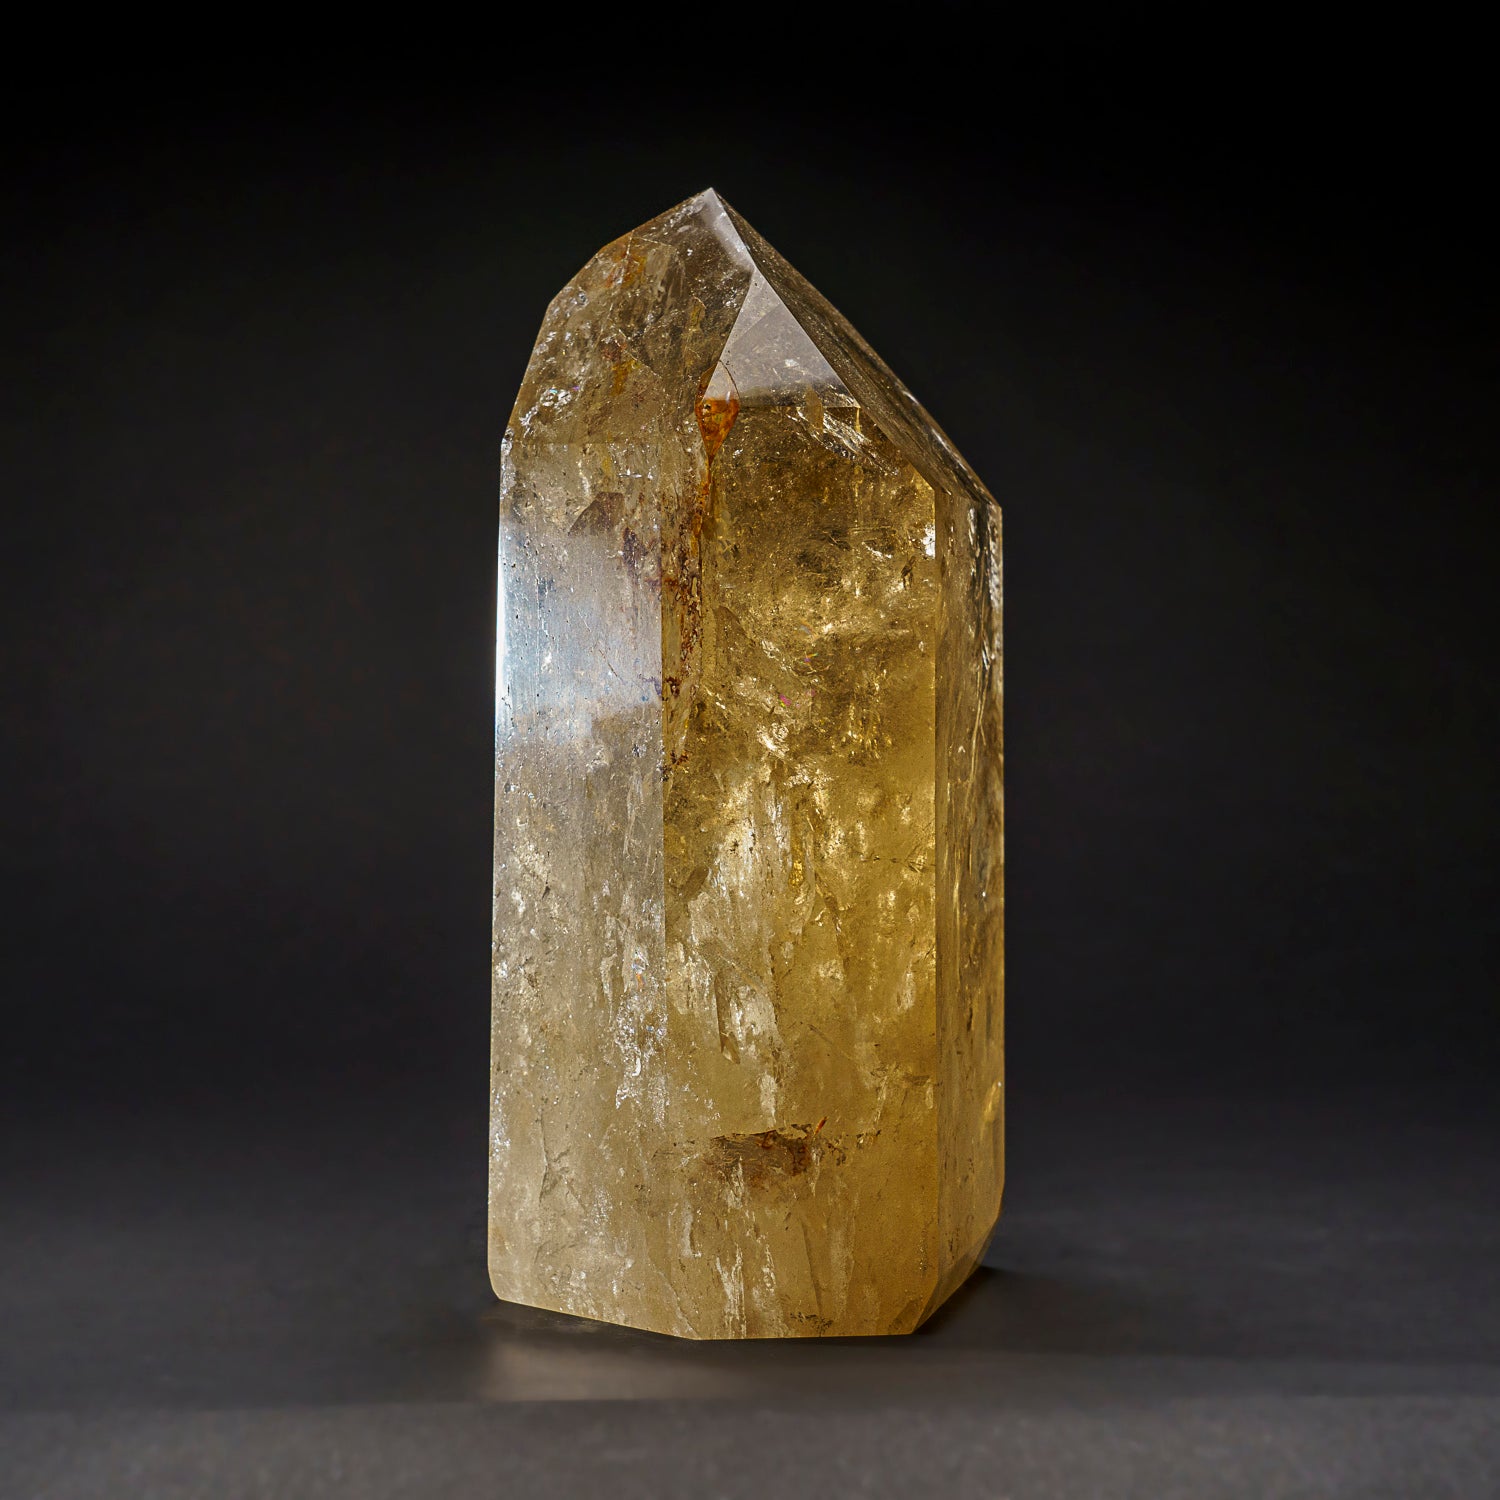 Genuine Museum Quality Citrine Crystal Point from Brazil (12 lbs)